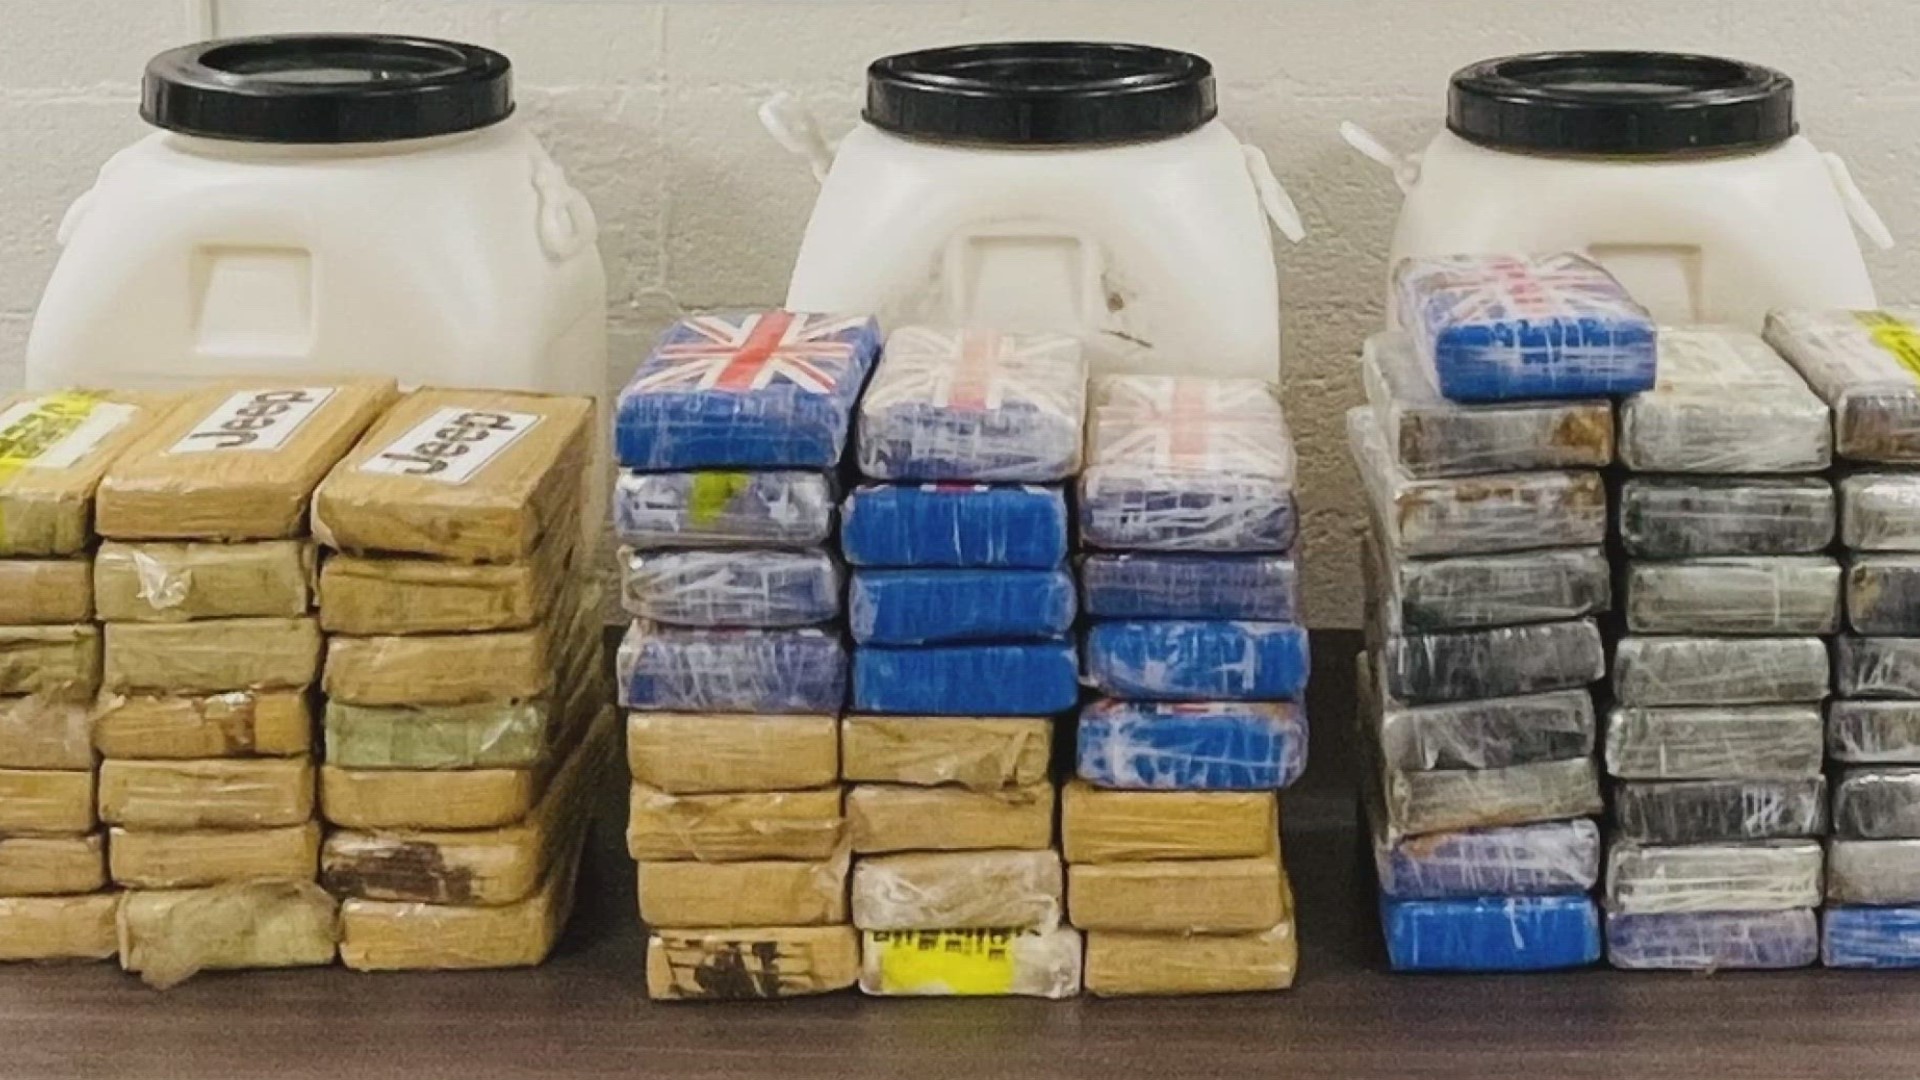 Ponchatoula police conduct largest drug bust in city's history, chief says